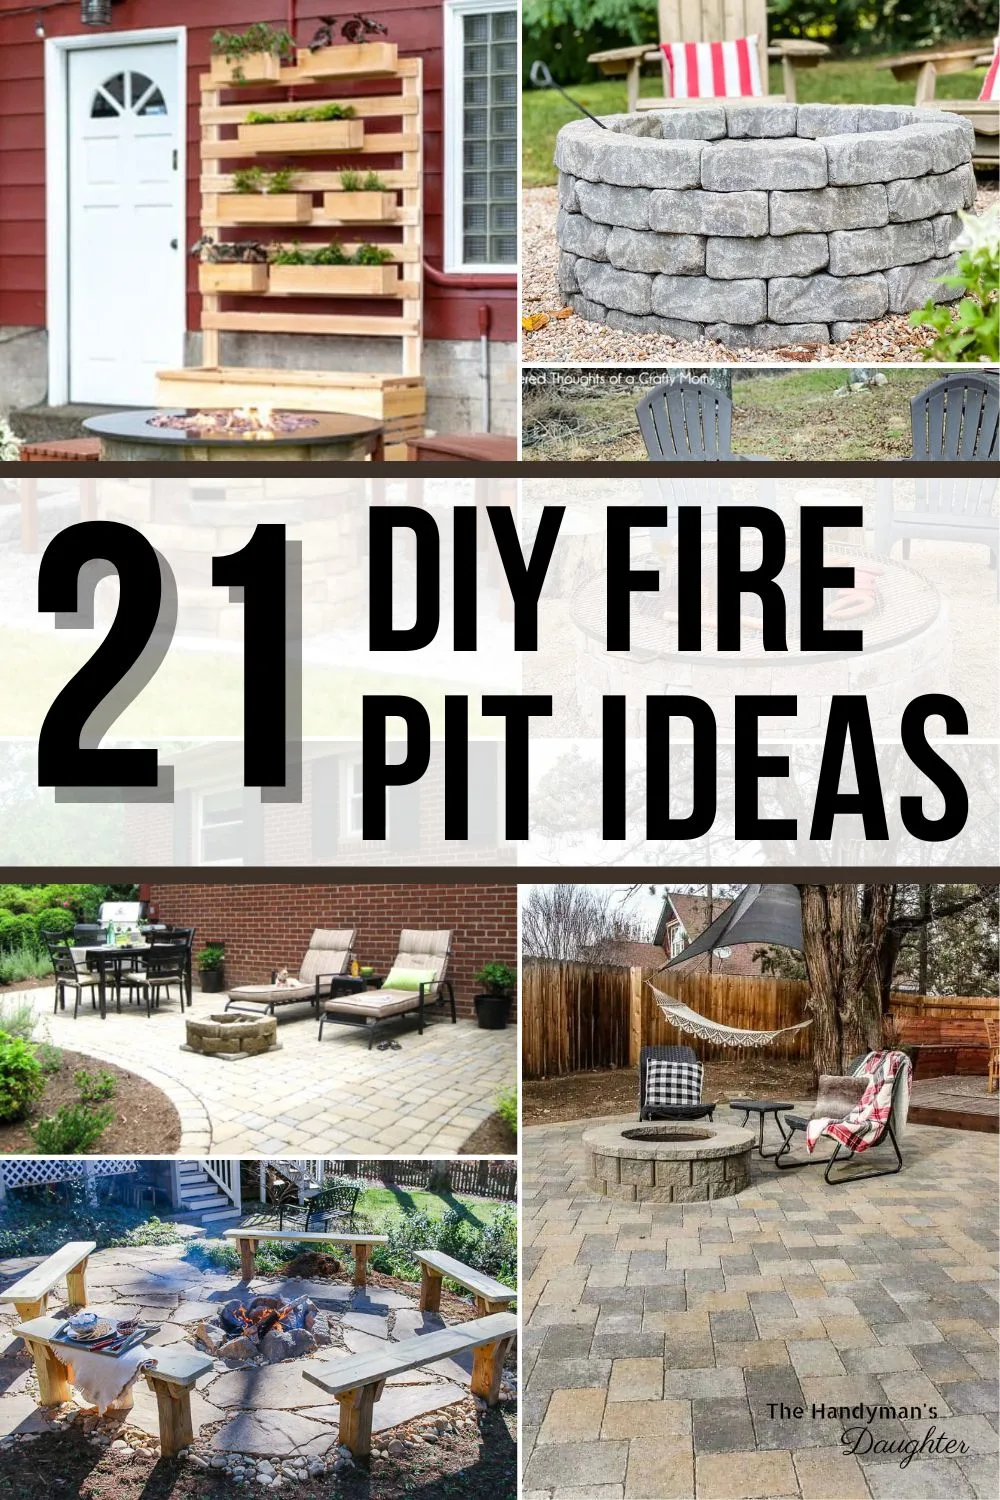 21 DIY Outdoor Furniture Ideas for Your Backyard